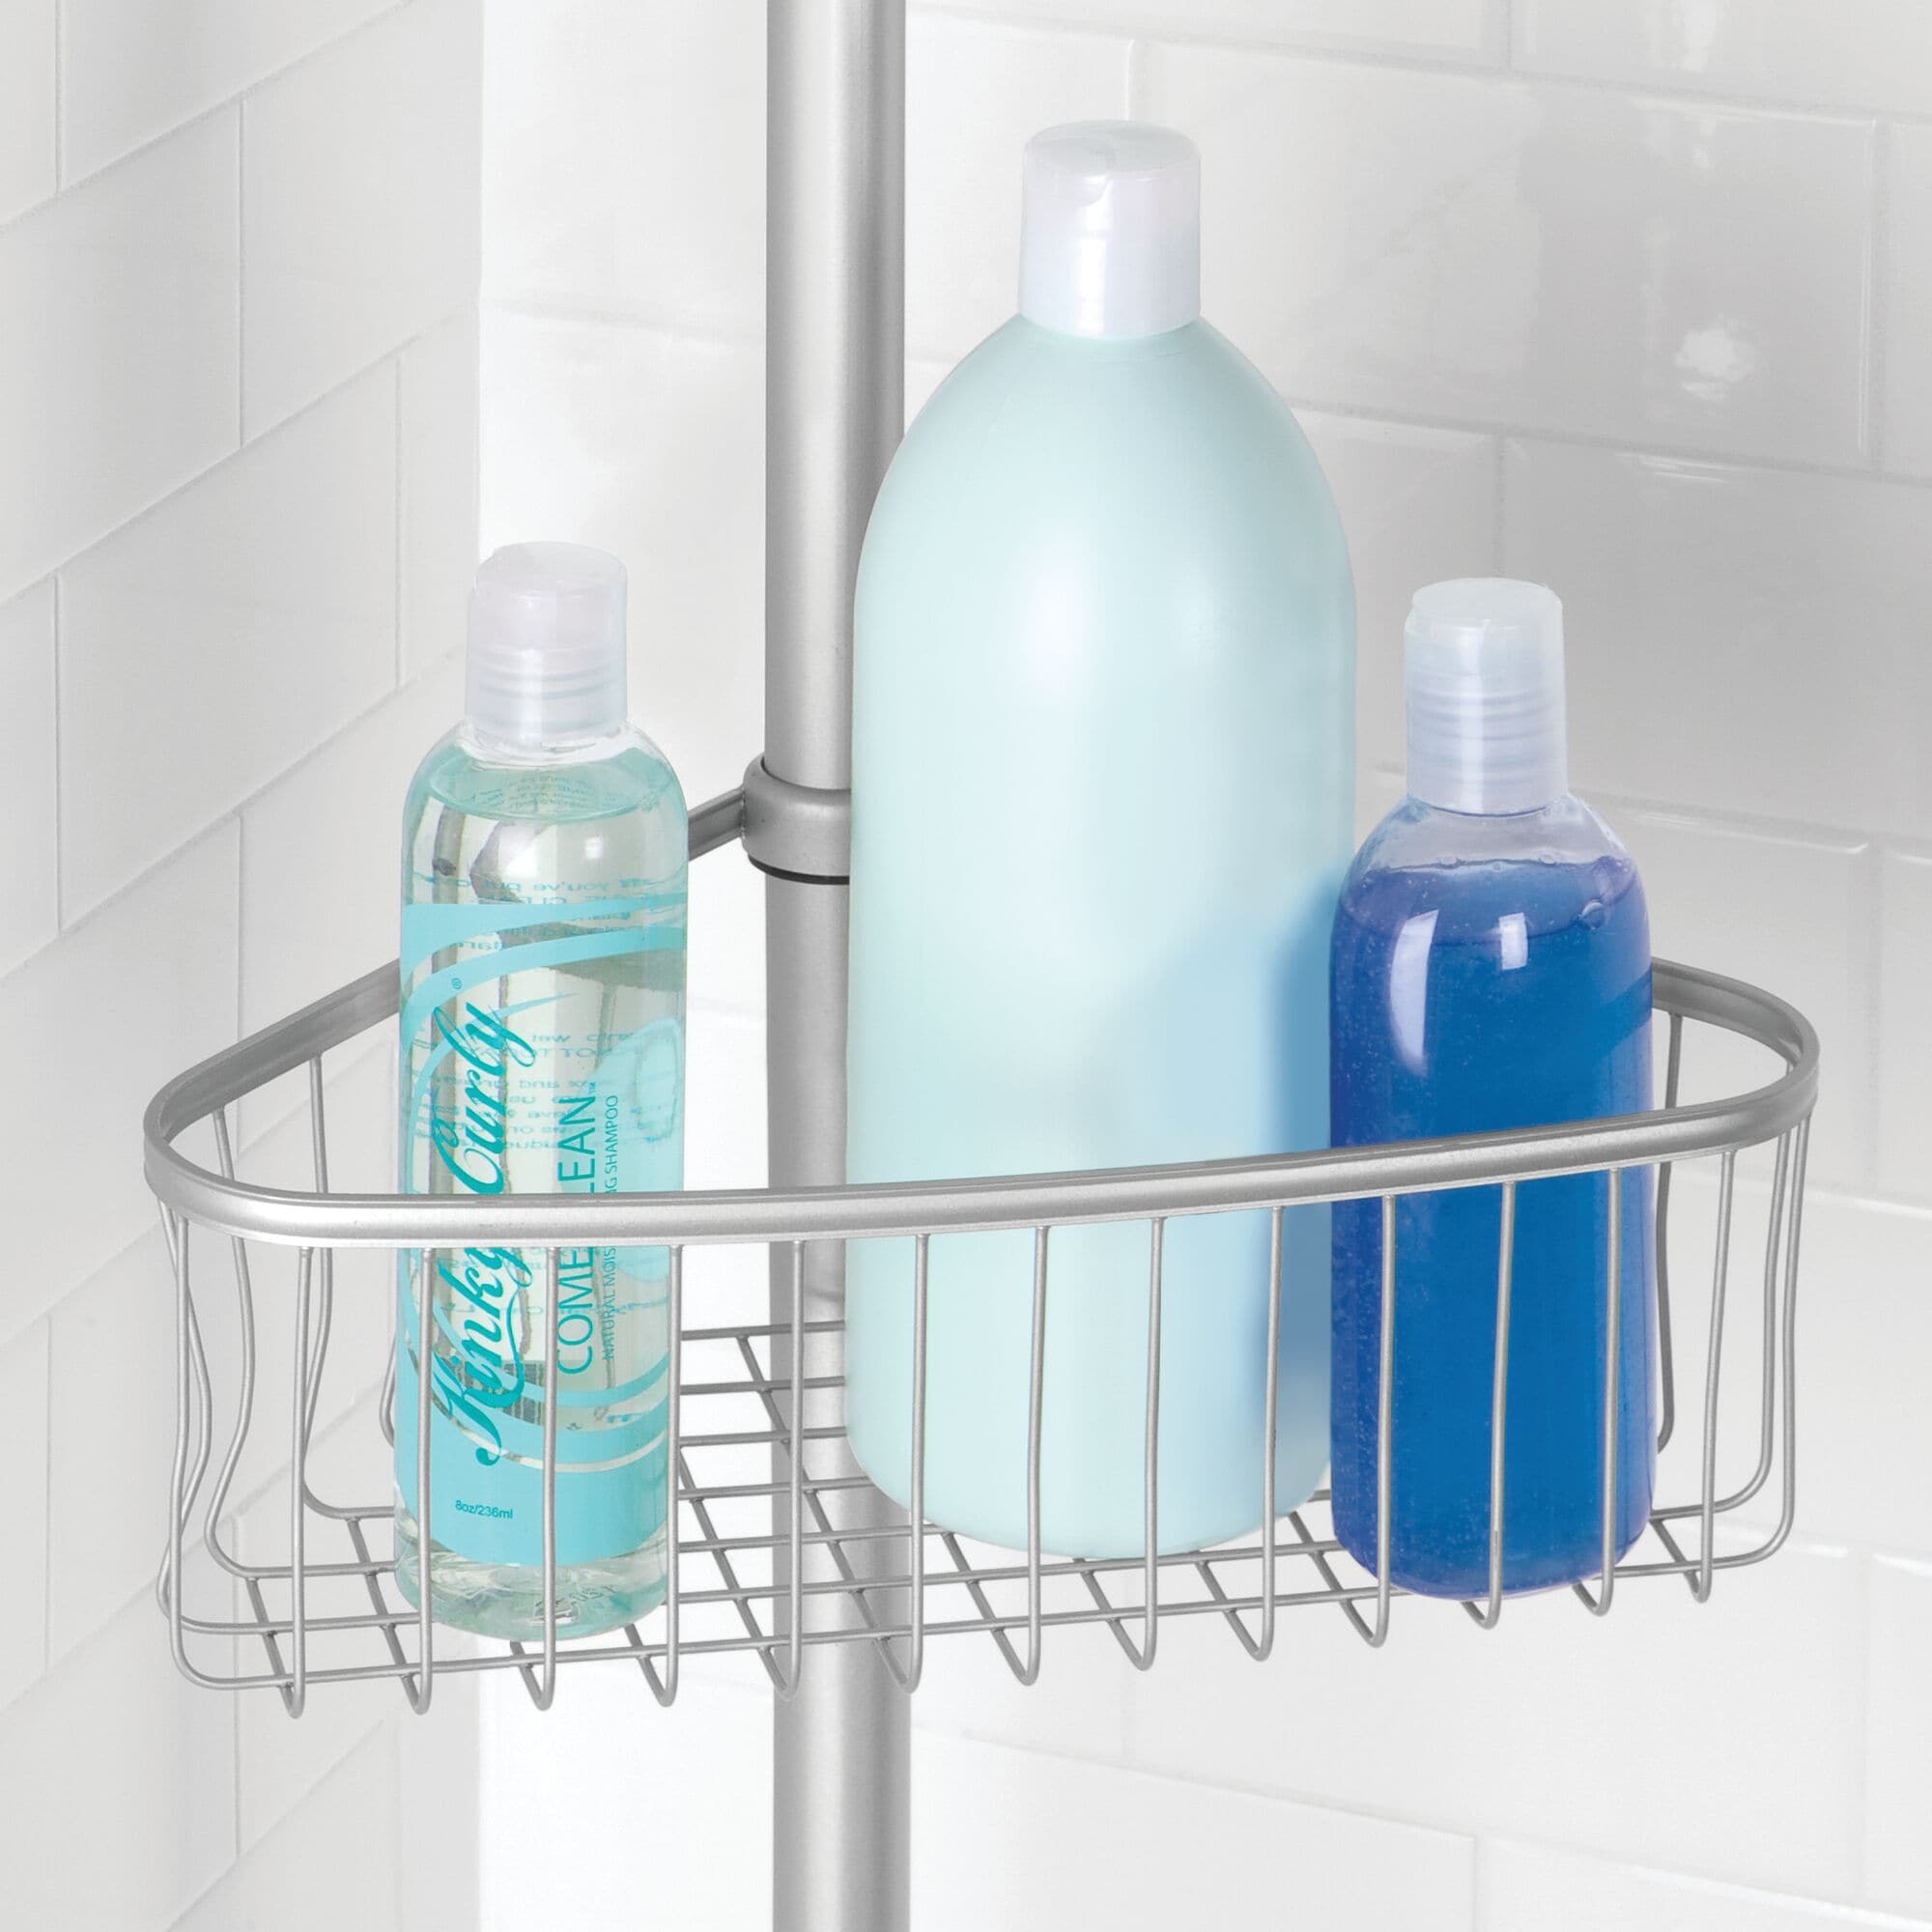 Interdesign Bathroom Shower Suction Caddy Holder for Shampoo, Conditioner, Soap - Clear